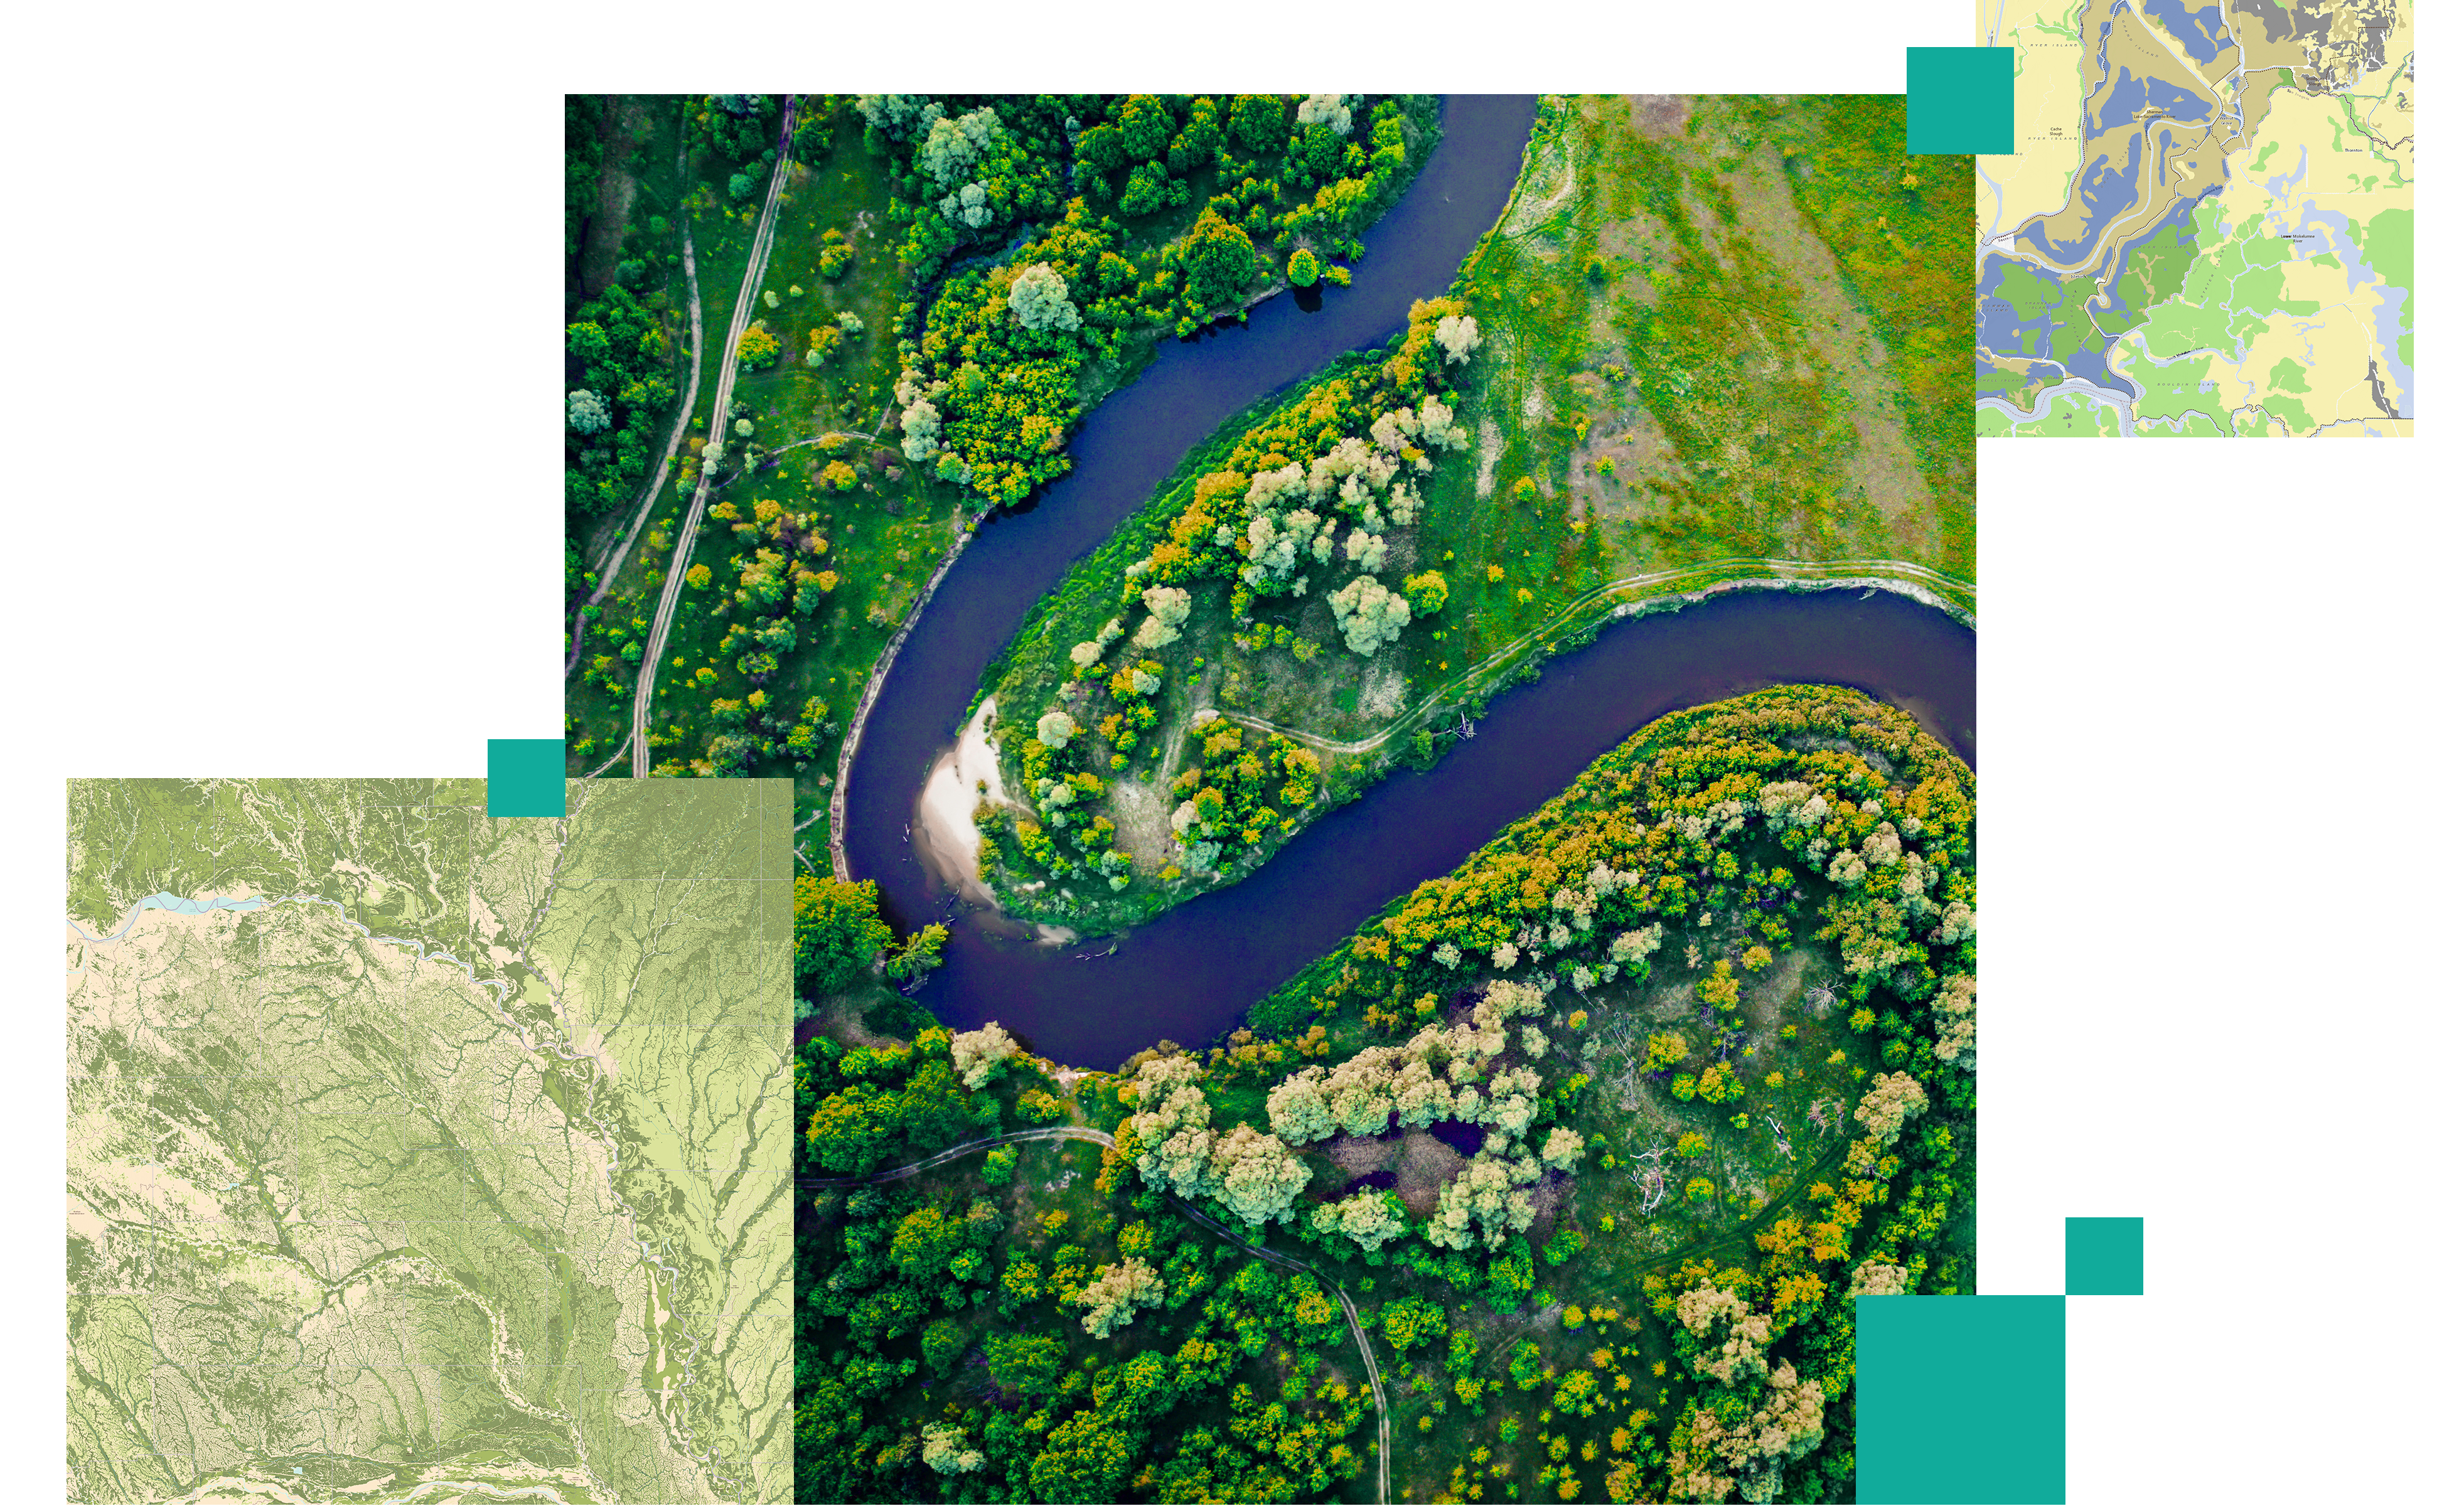 An aerial photo of a green wooded area with a curving blue river, overlaid with a contour map and a heat map in green